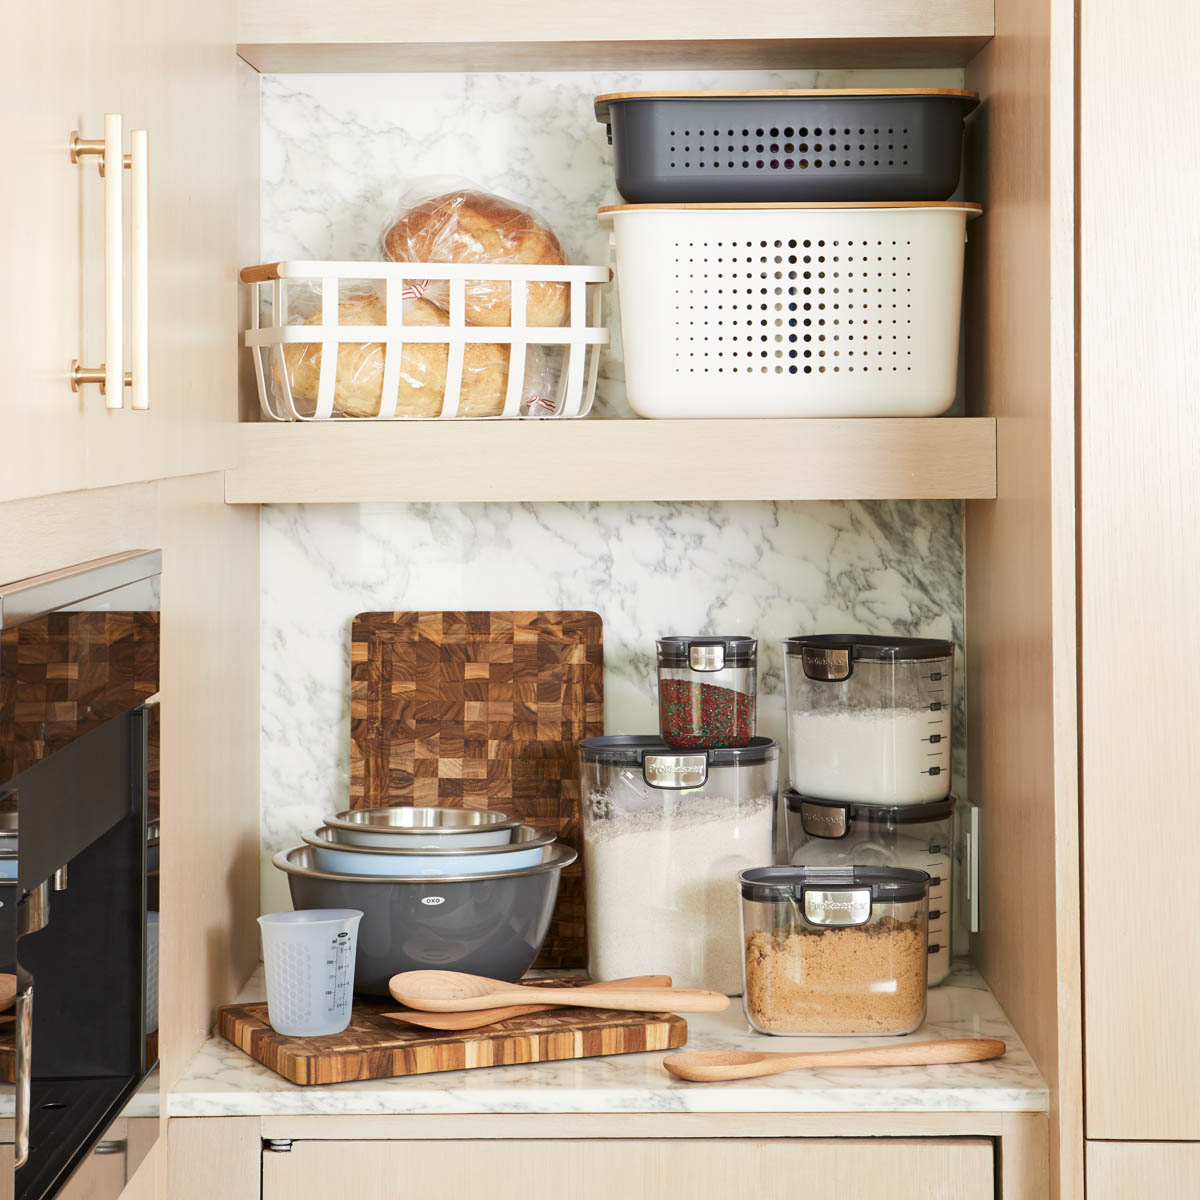 https://www.containerstore.com/catalogimages/436836/H21_Baking2.jpg